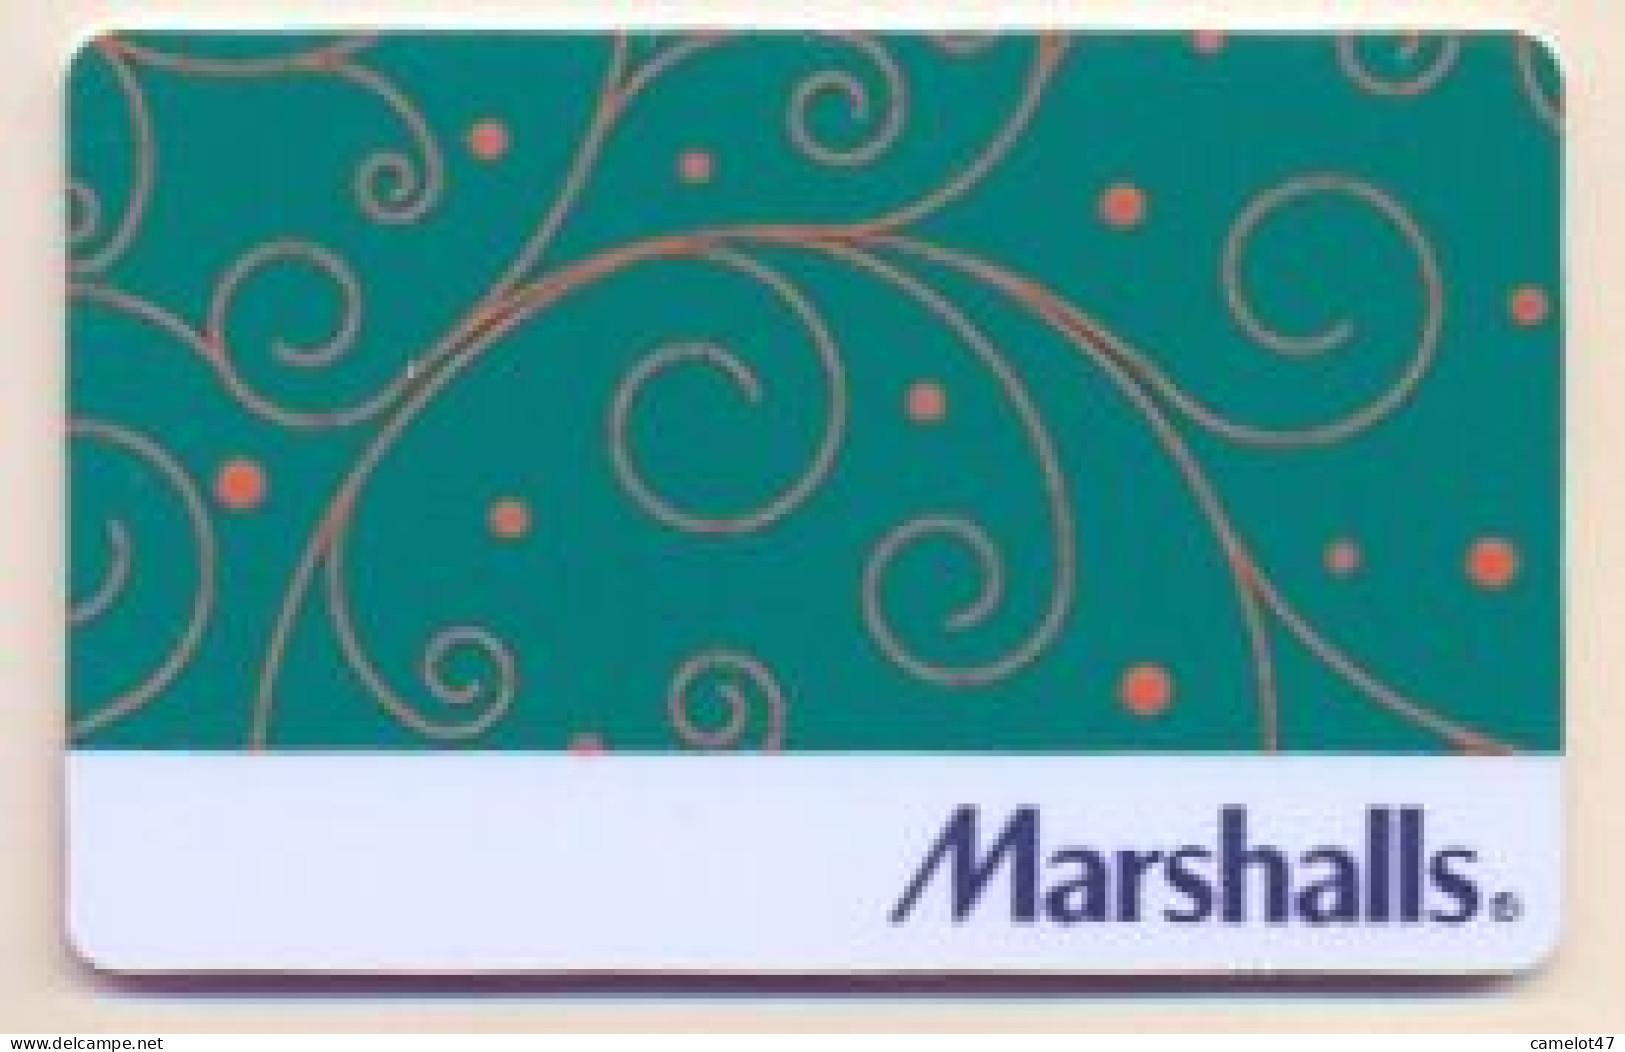 Marshalls, U.S.A., Carte Cadeau Pour Collection, Sans Valeur, # Marshalls-75 - Gift And Loyalty Cards